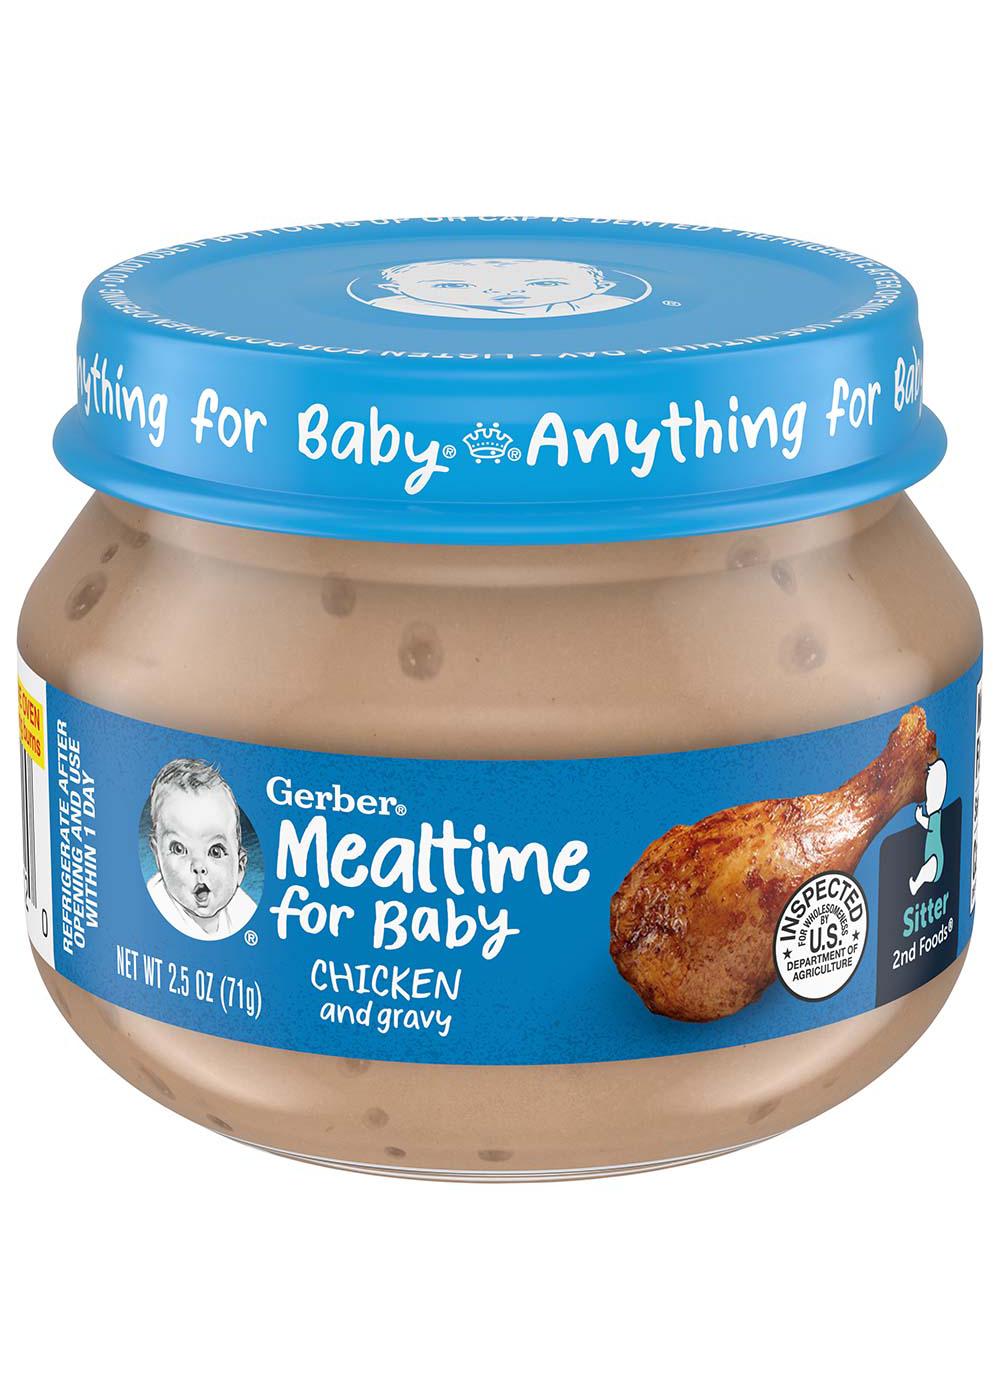 Gerber Mealtime for Baby 2nd Foods - Chicken & Gravy; image 1 of 2